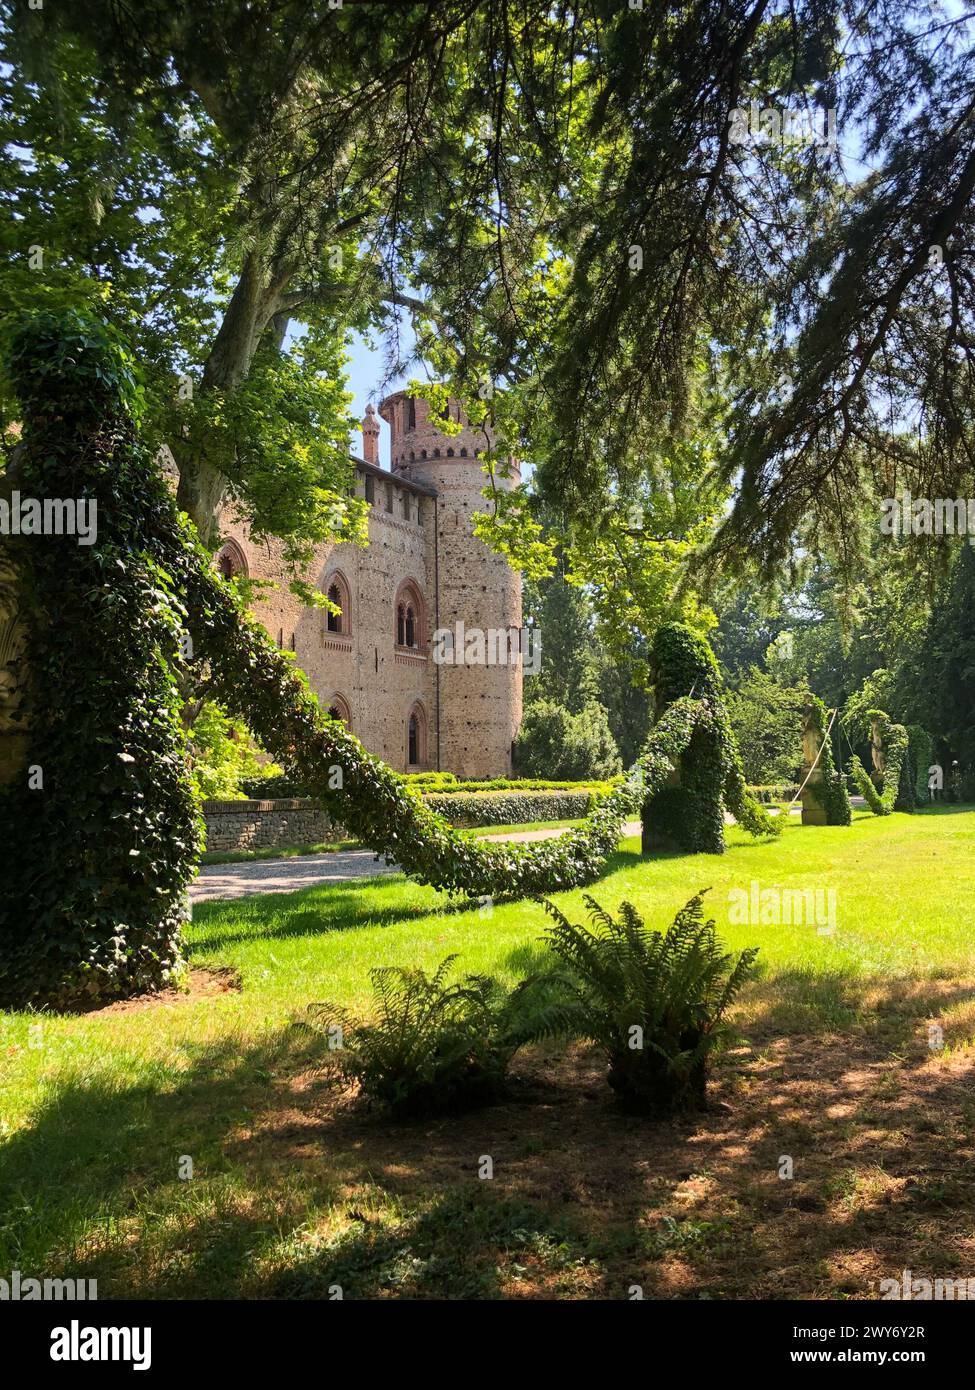 Grazzano Visconti, italy - june 11, 2023: view from the park of medieval castle built in 1395 and later refurbished in piacenza province Stock Photo